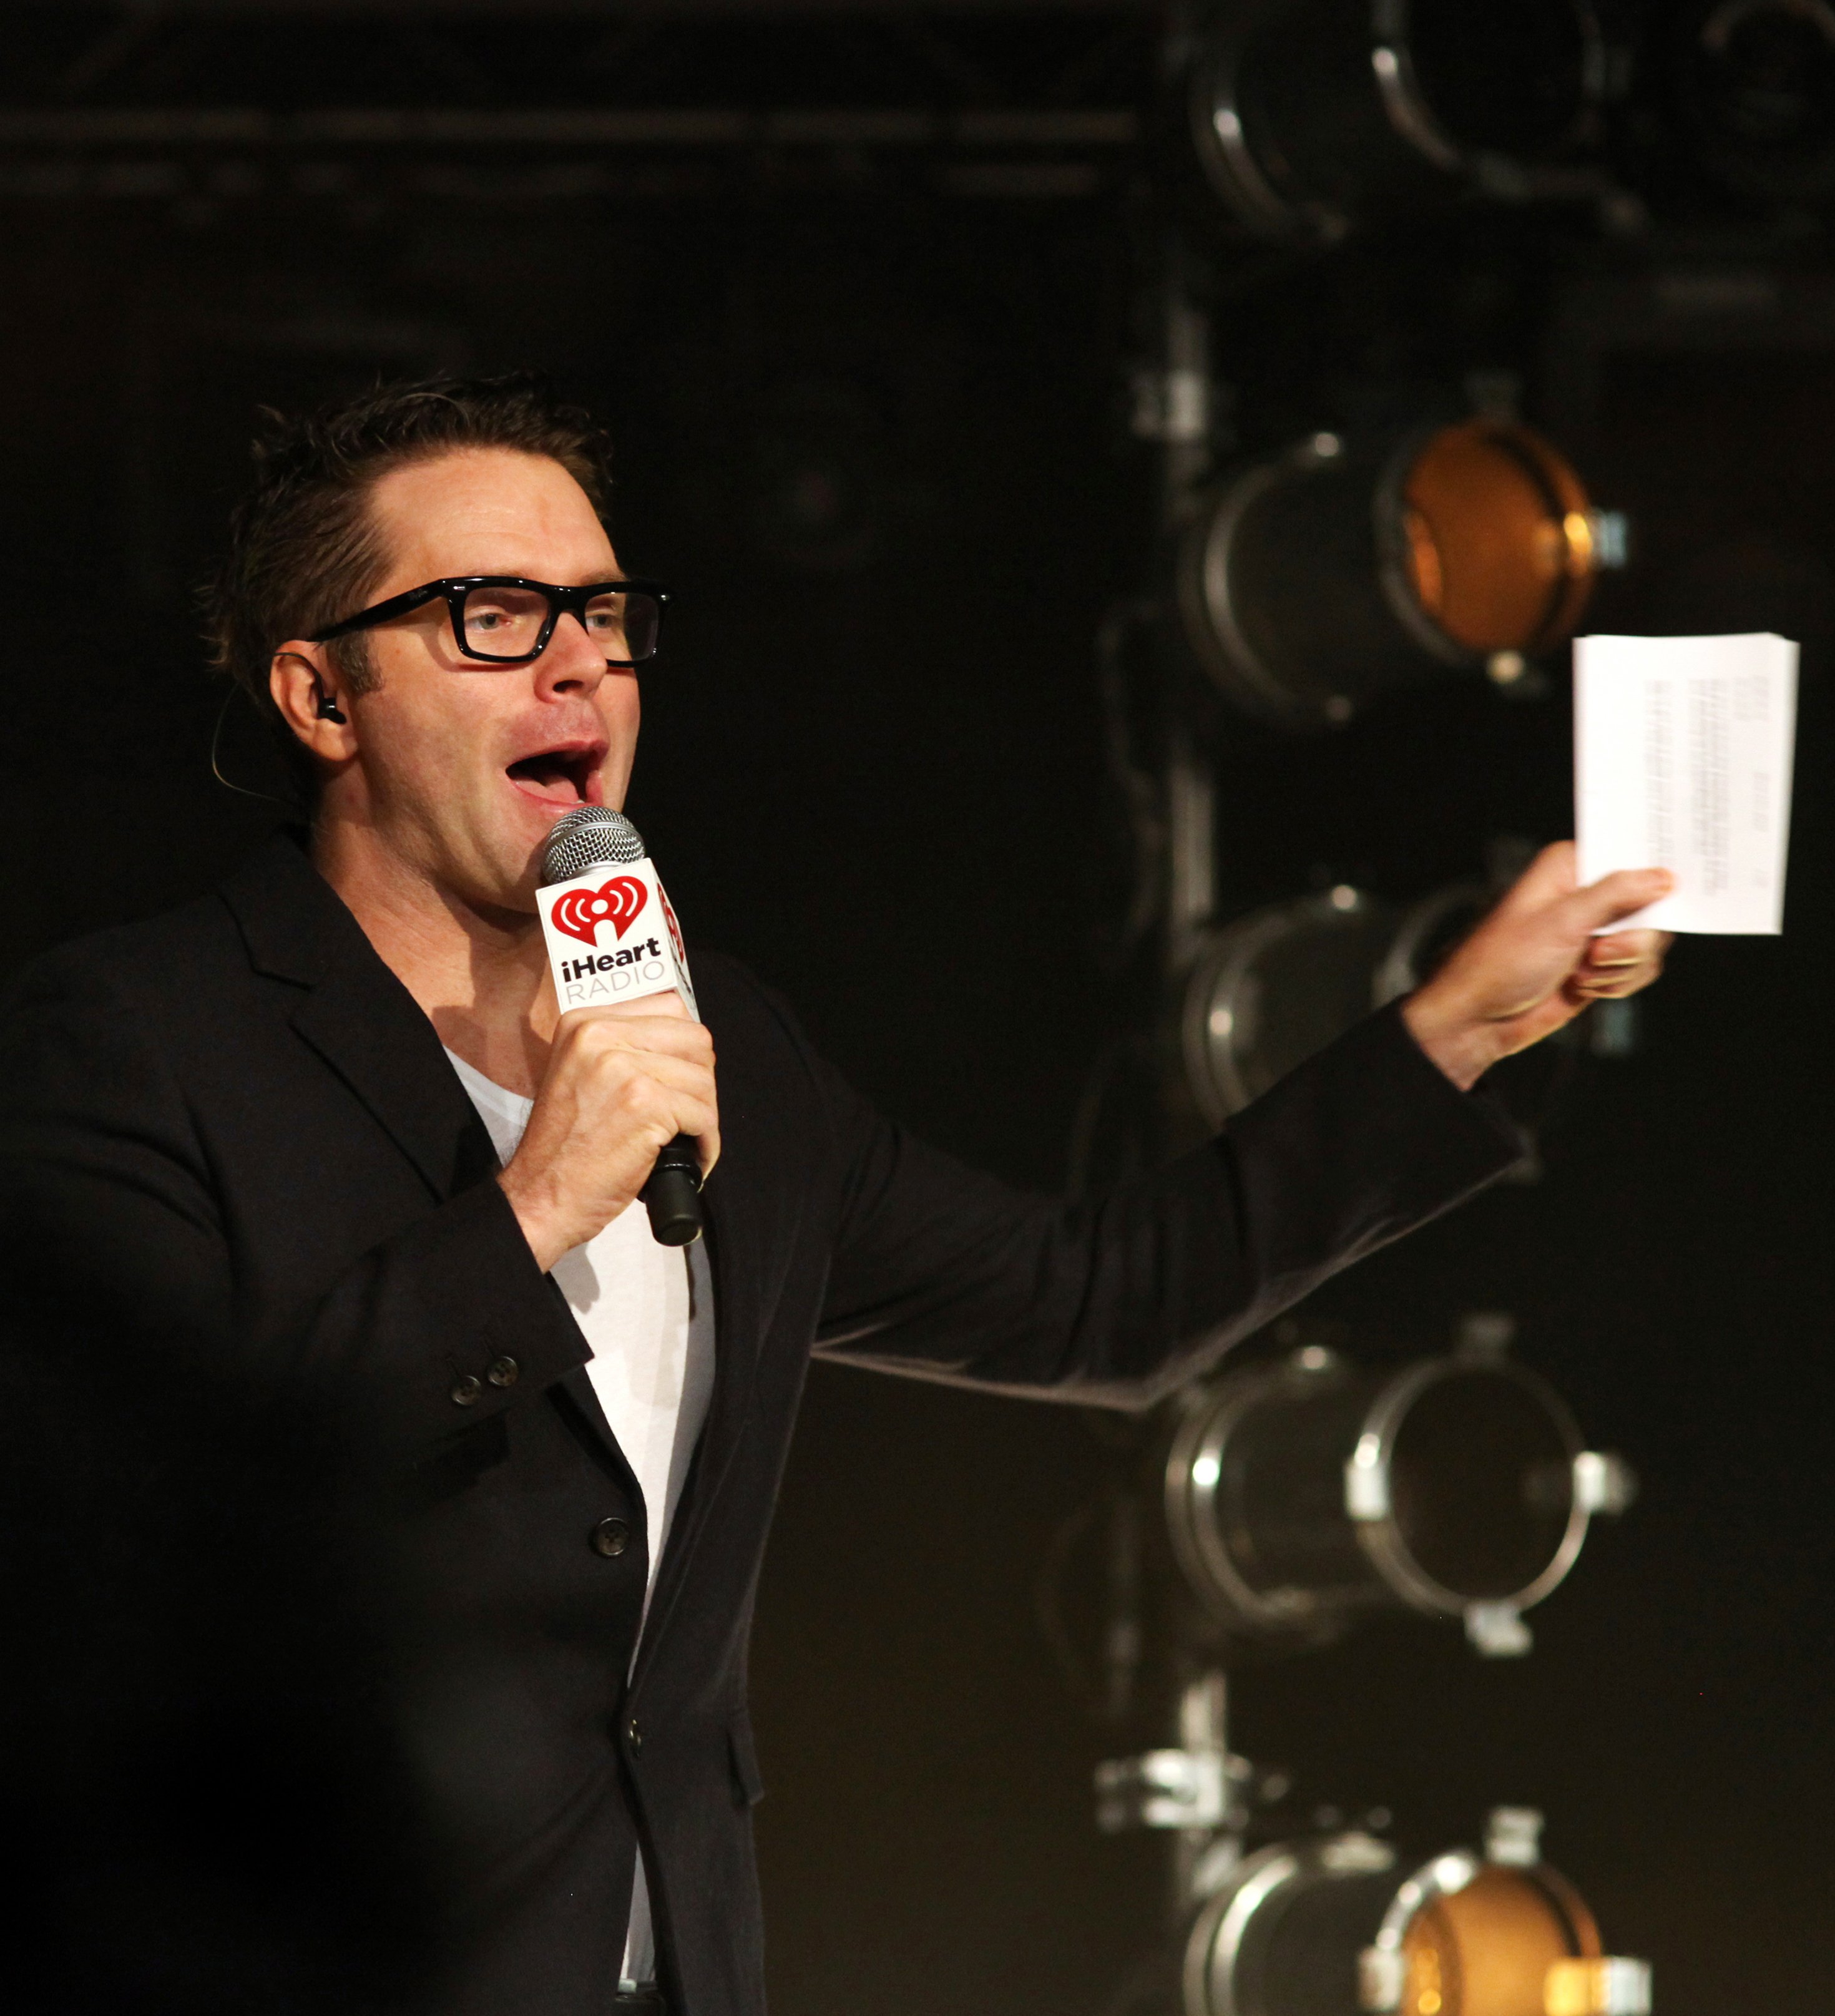 Bobby Bones at the iHeartRadio Theater on August 28, 2014 in New York City, for Brad Paisley's album release party . | Photo: Lisa Gansky ,CC BY-SA 2.0 / WikiMedia